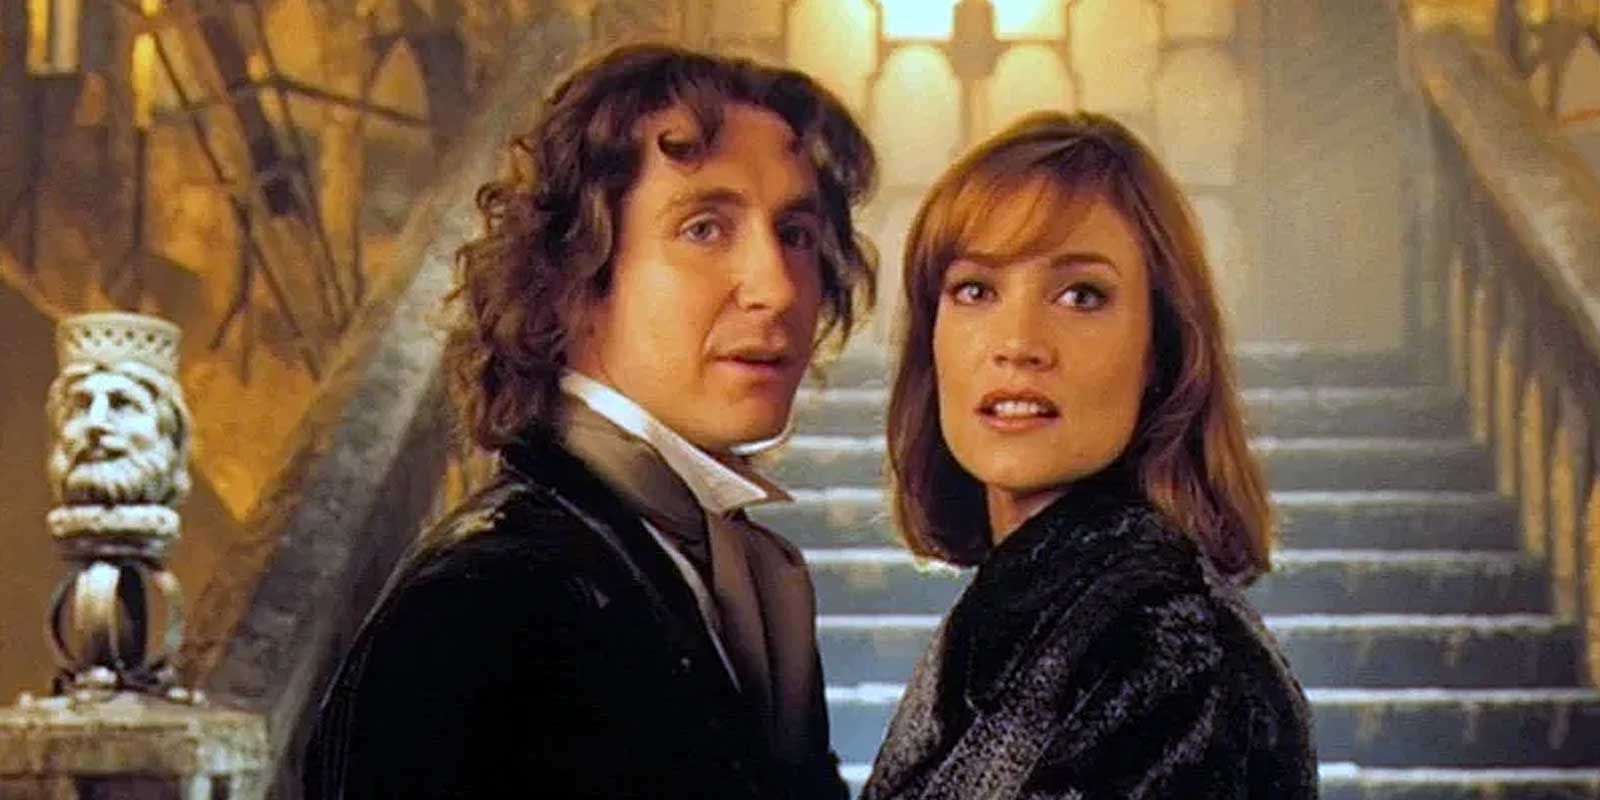 Paul McGann as Eighth Doctor and Daphne Ashbrook as Grace in Doctor Who